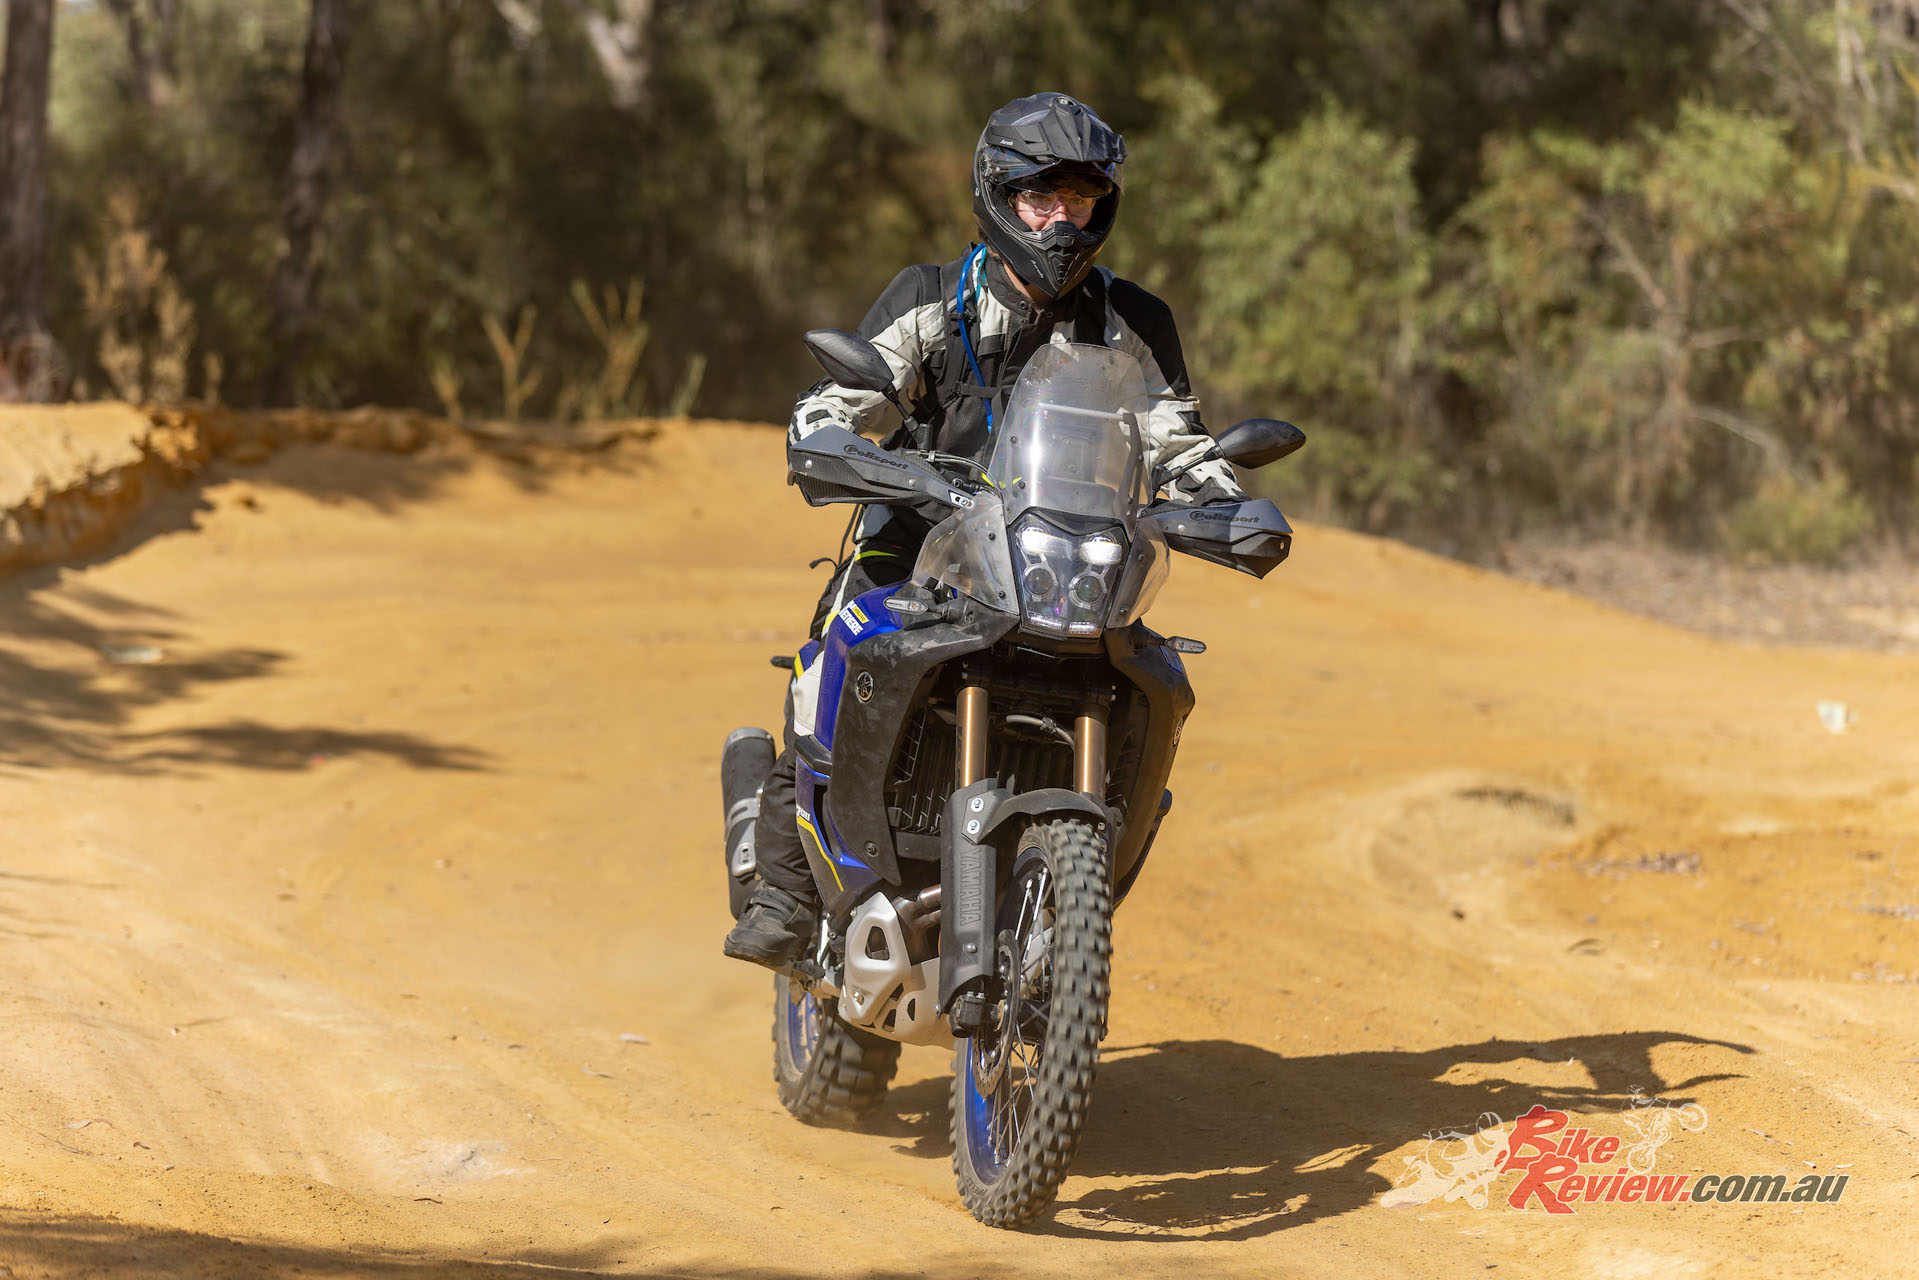 "The ergonomics make for a remarkably nice ride, standing or sitting. That flat, motocross-inspired seat is flawless."